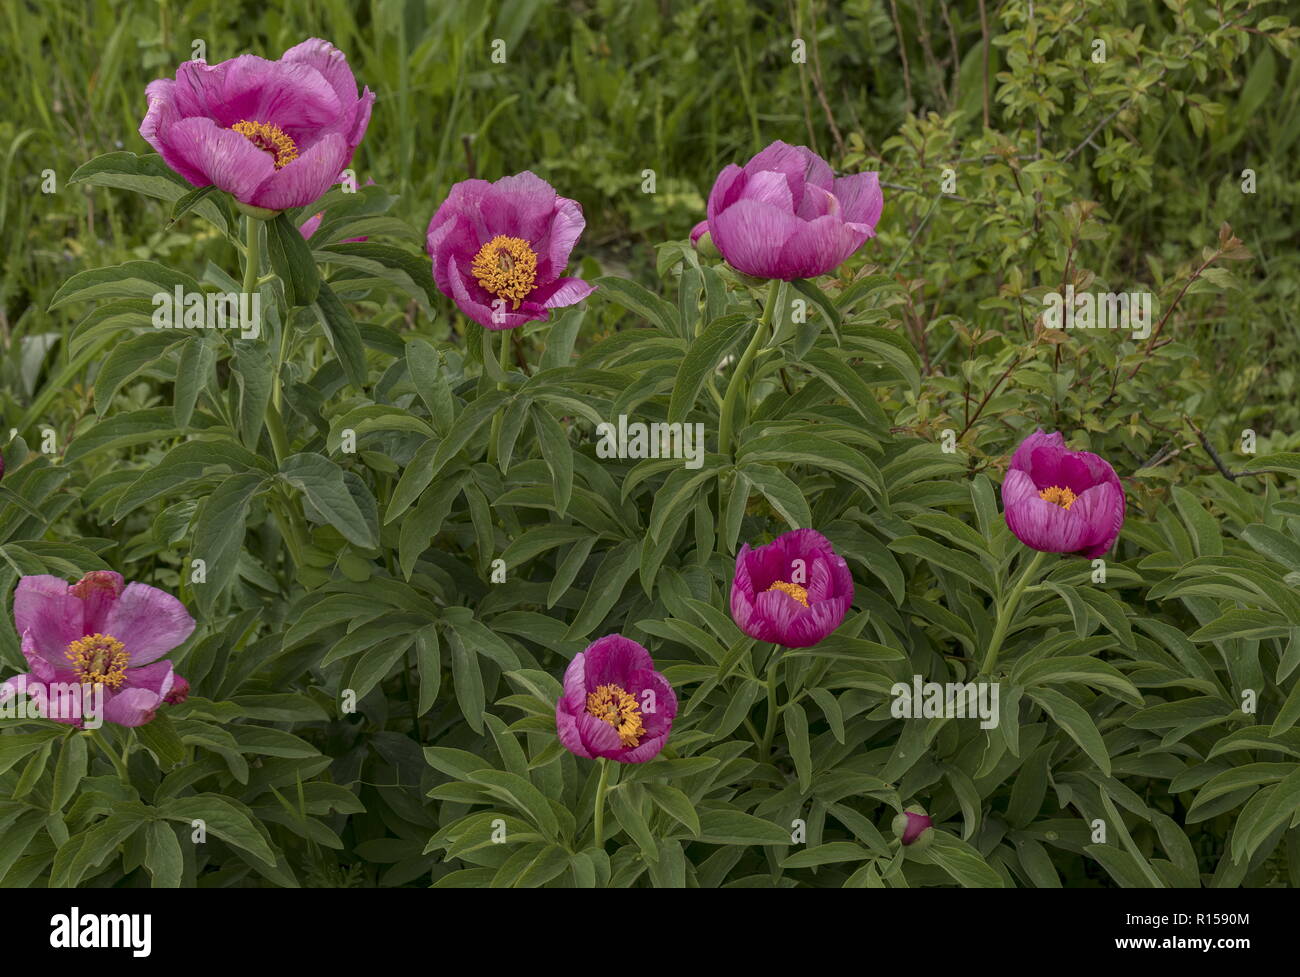 Common peony, Paeonia officinalis, in full flower on limestone grassland, central Croatia. Stock Photo